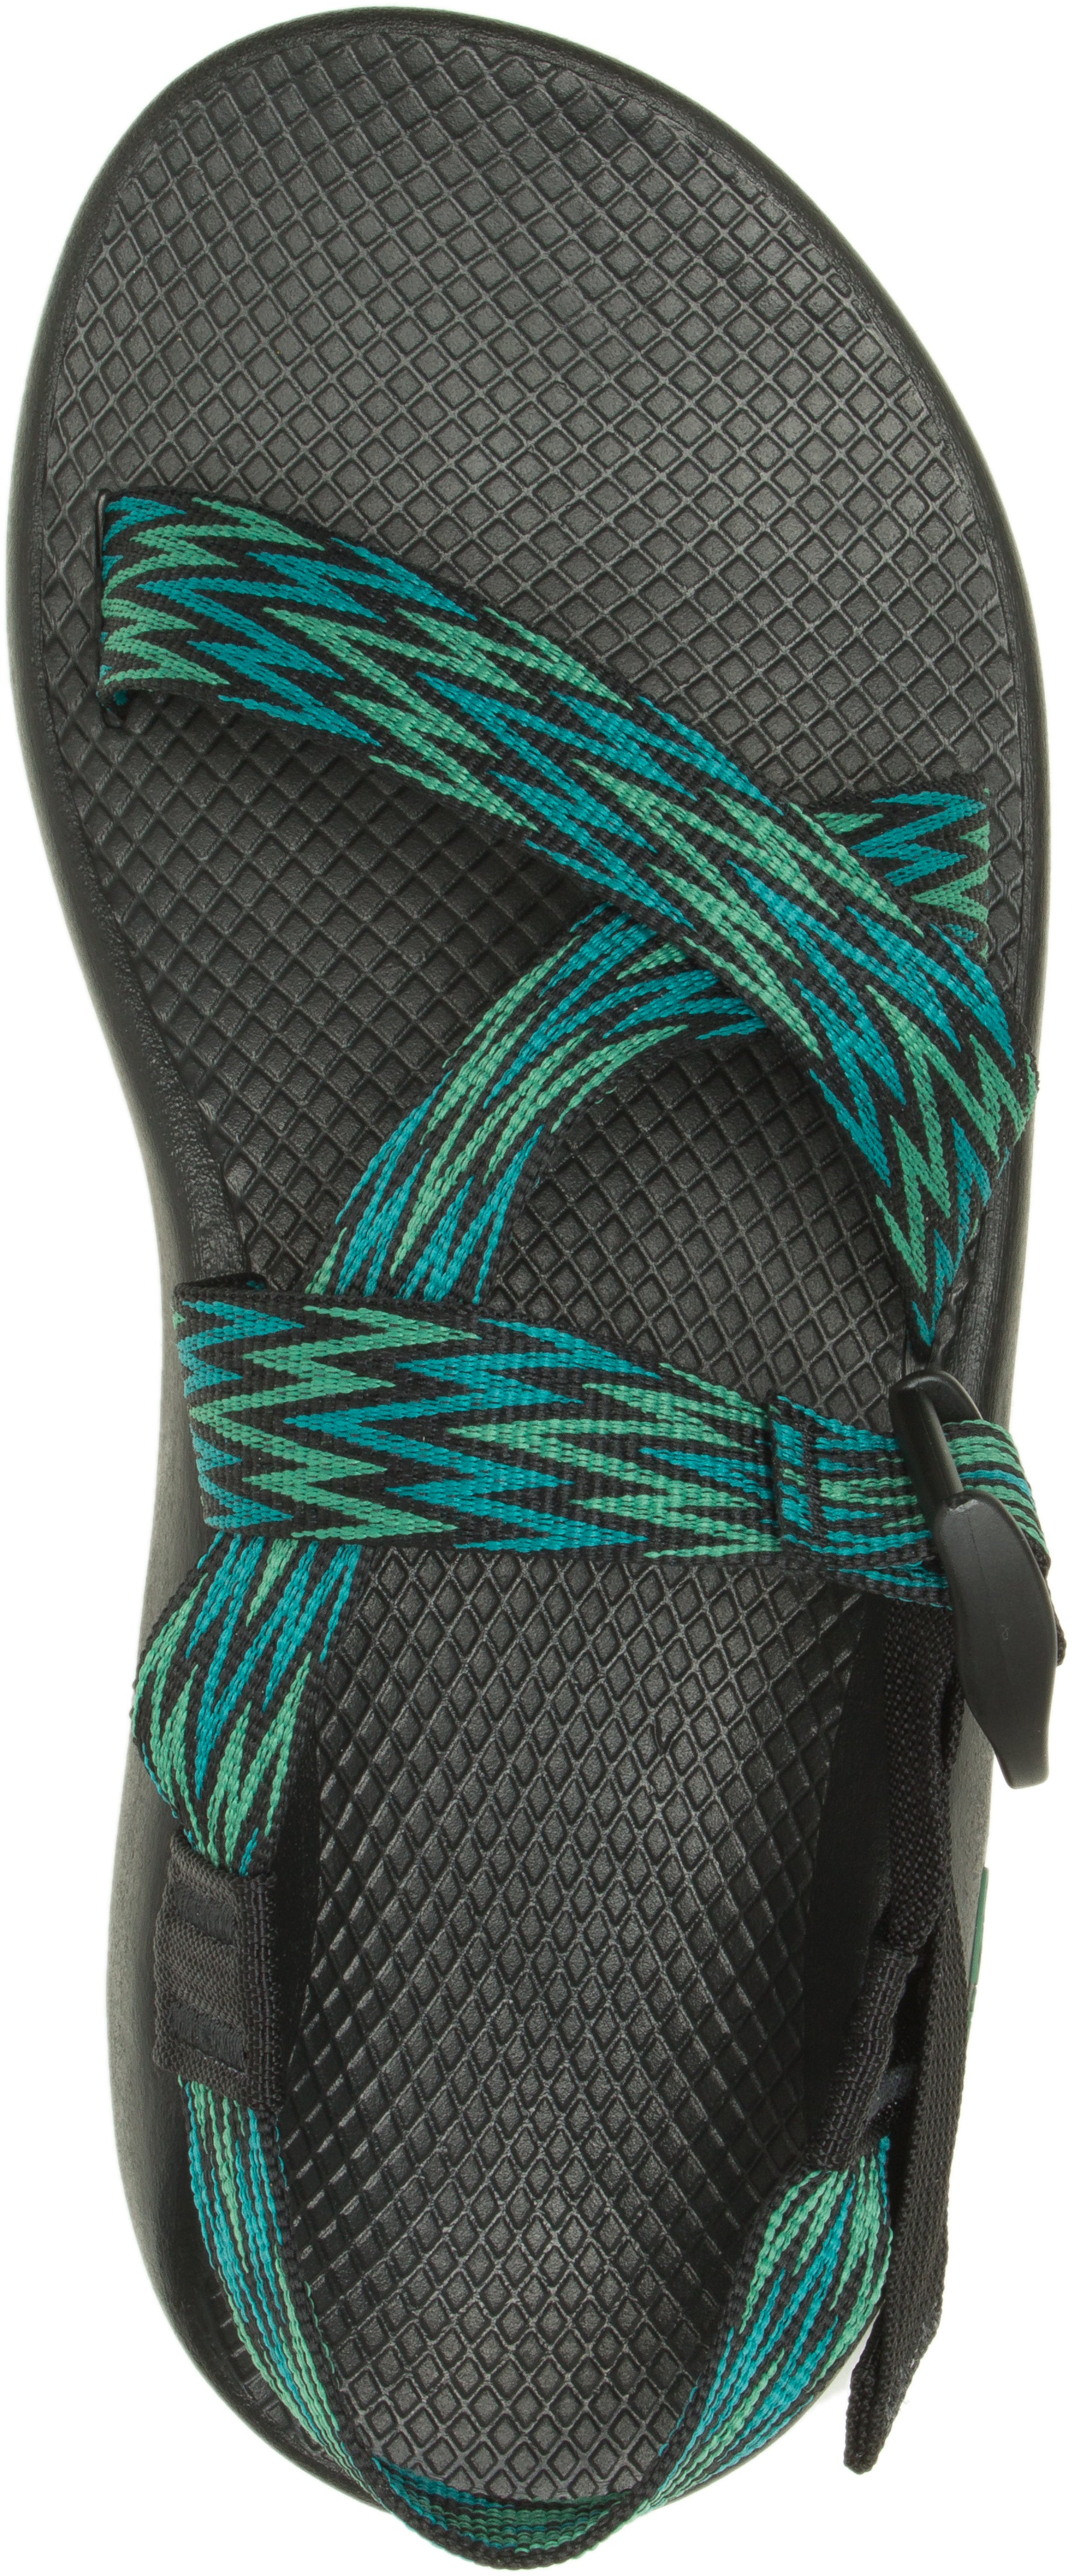 Chaco Men's Z/1 Classic squall green